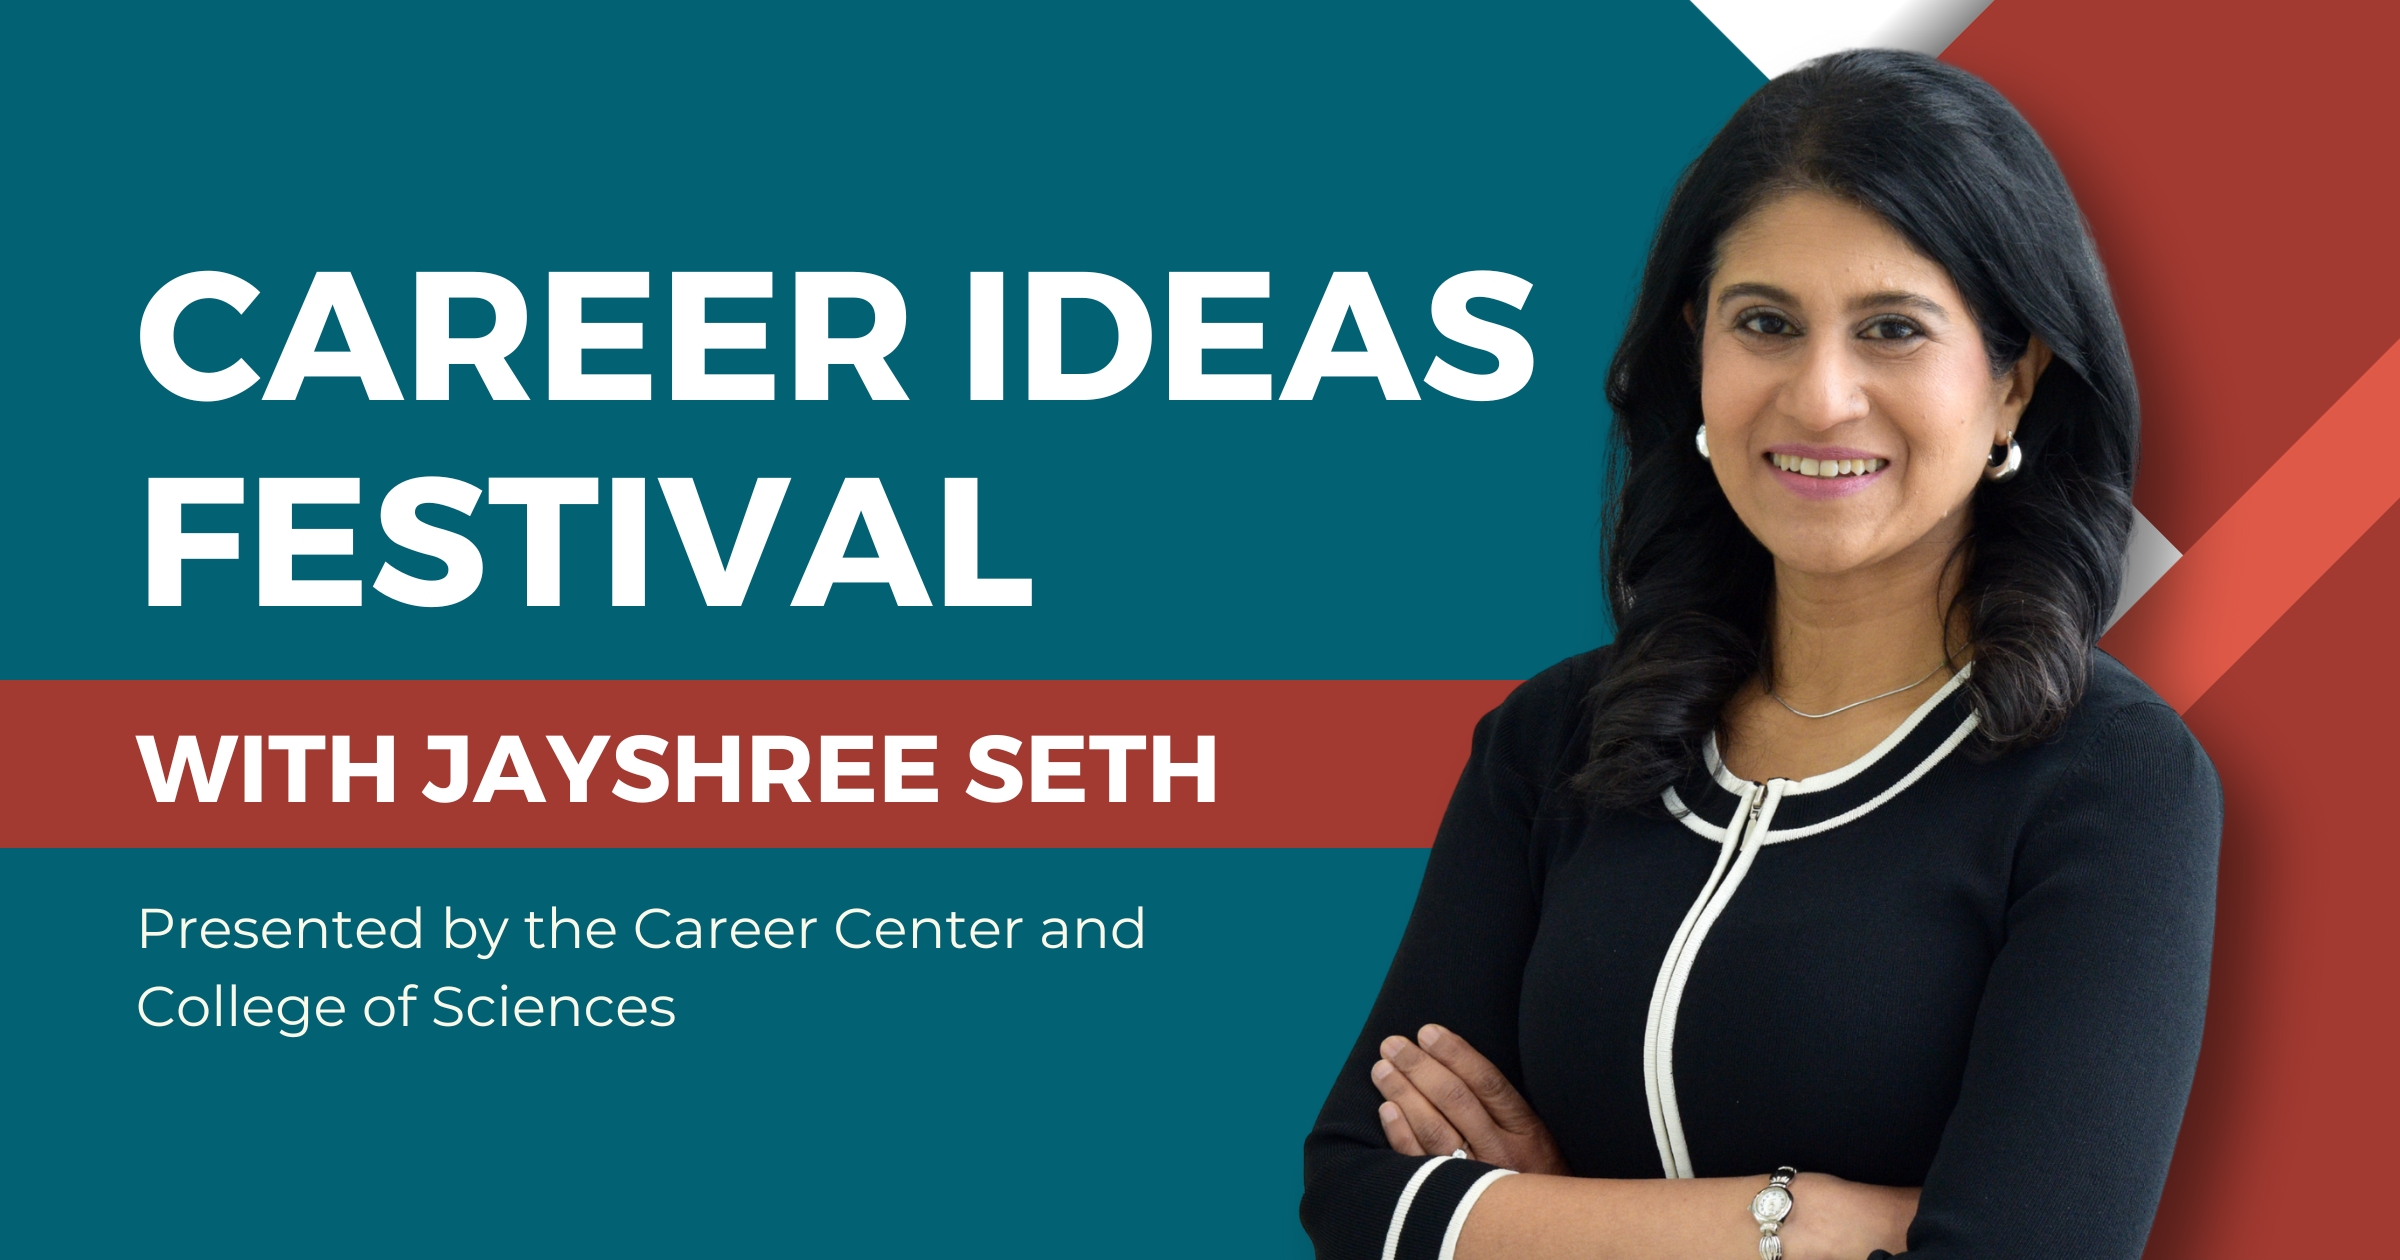 Career Ideas Festival, with Jayshree Seth, presented by the Career Center and the College of Sciences, next to a person standing for a portrait